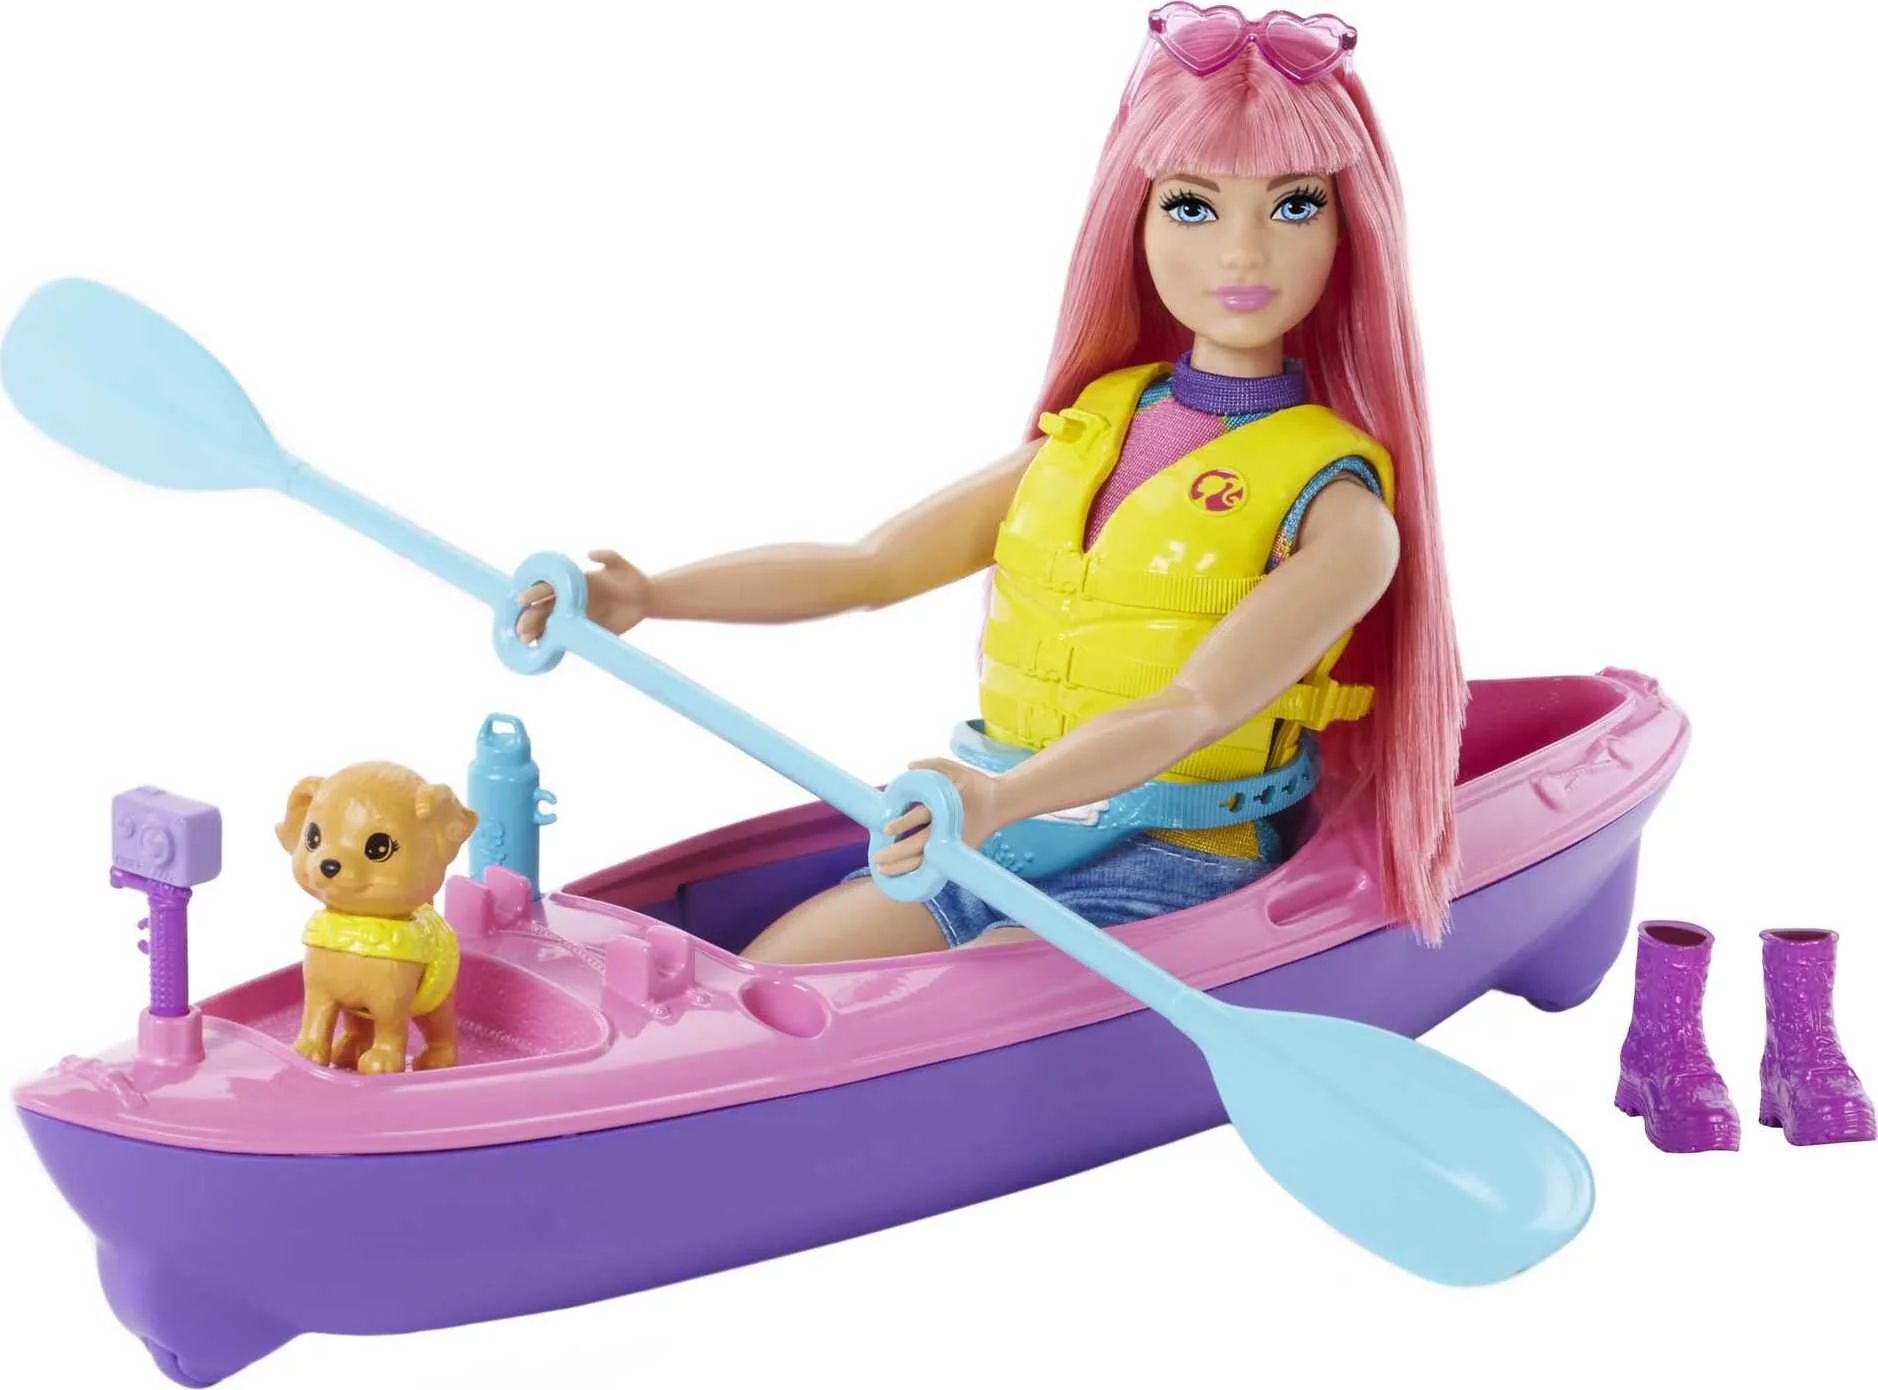 Barbie It Takes Two Daisy Doll & Kayak Set, Curvy Doll with Pink Hair, Puppy & Themed Accessories... | Walmart (US)